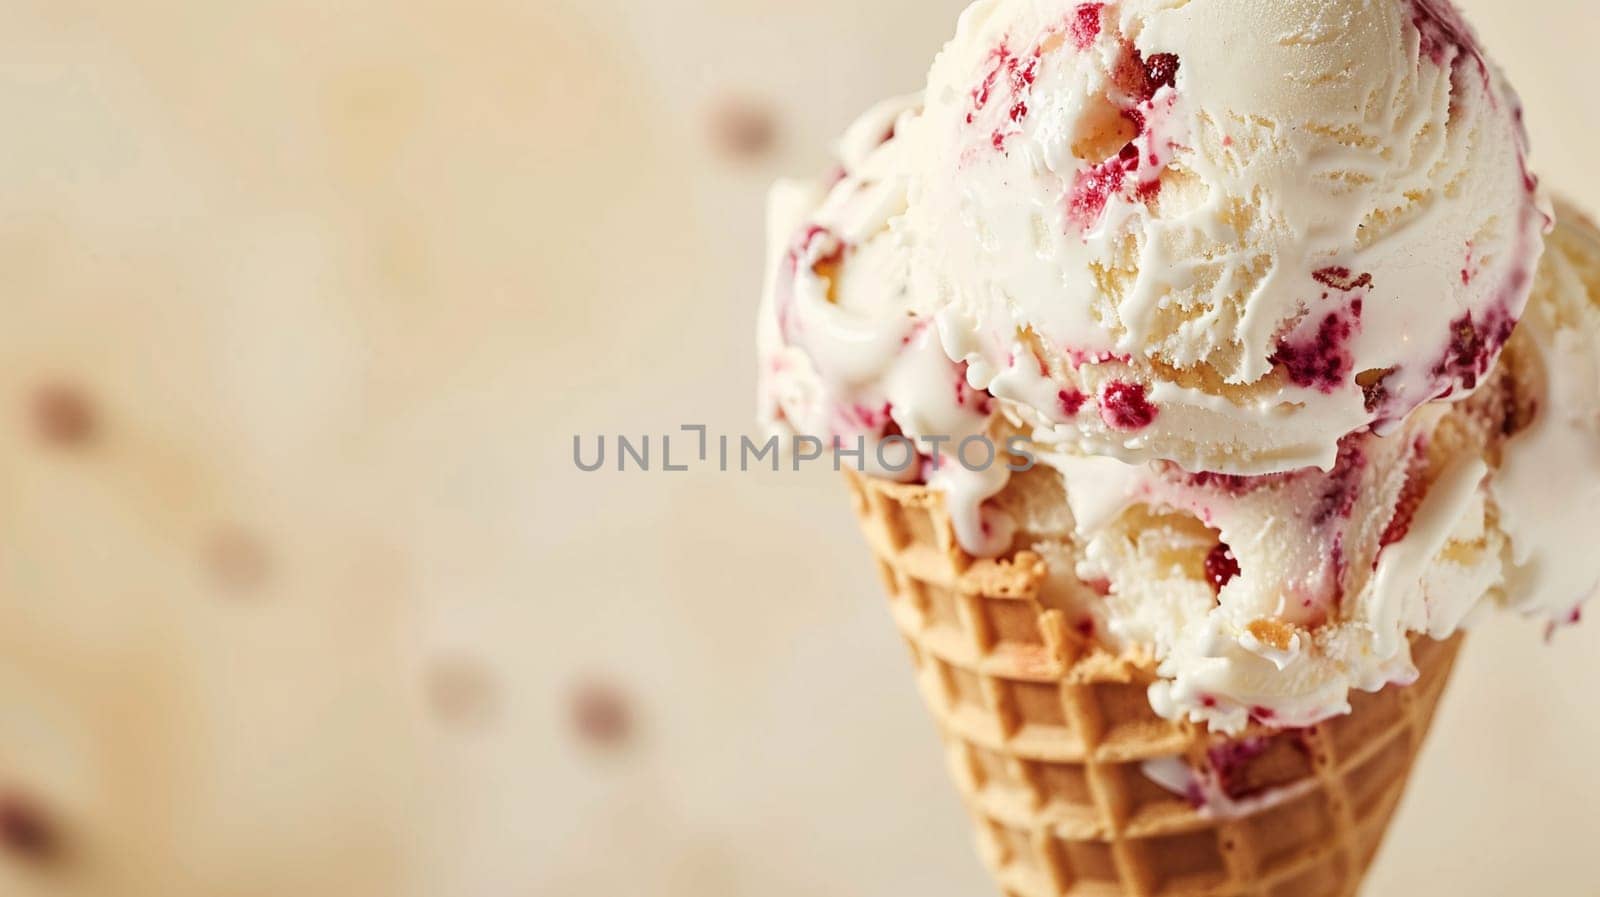 Close-up image of raspberry ripple ice cream melting on a cone. Tasty, creamy dessert perfect for summer refreshment. Space for text design.